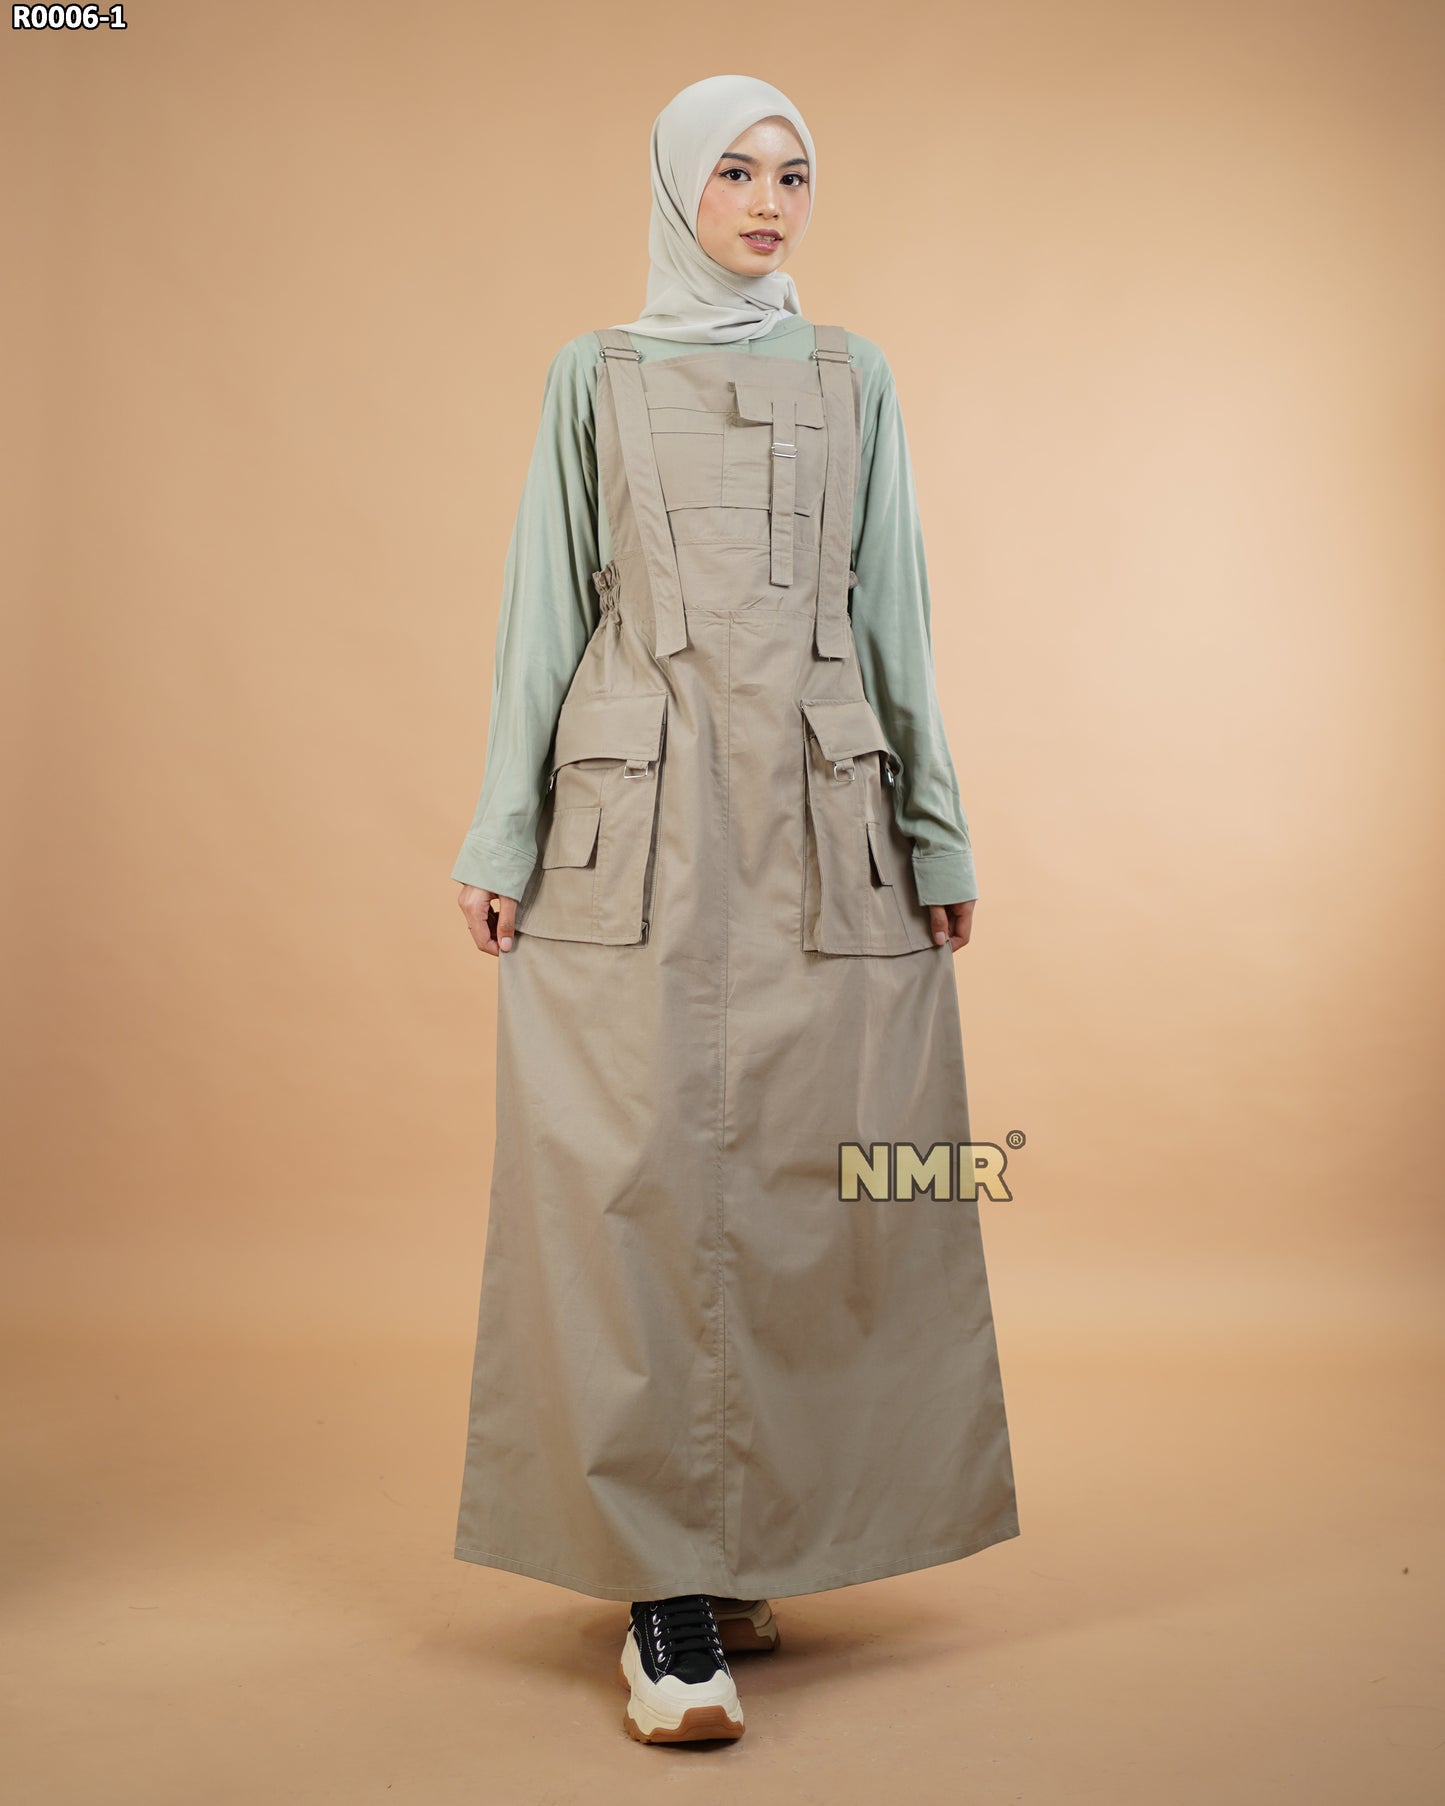 NMR Gamis Jumpsuit Overall Baby Canvas Vol R0006-1